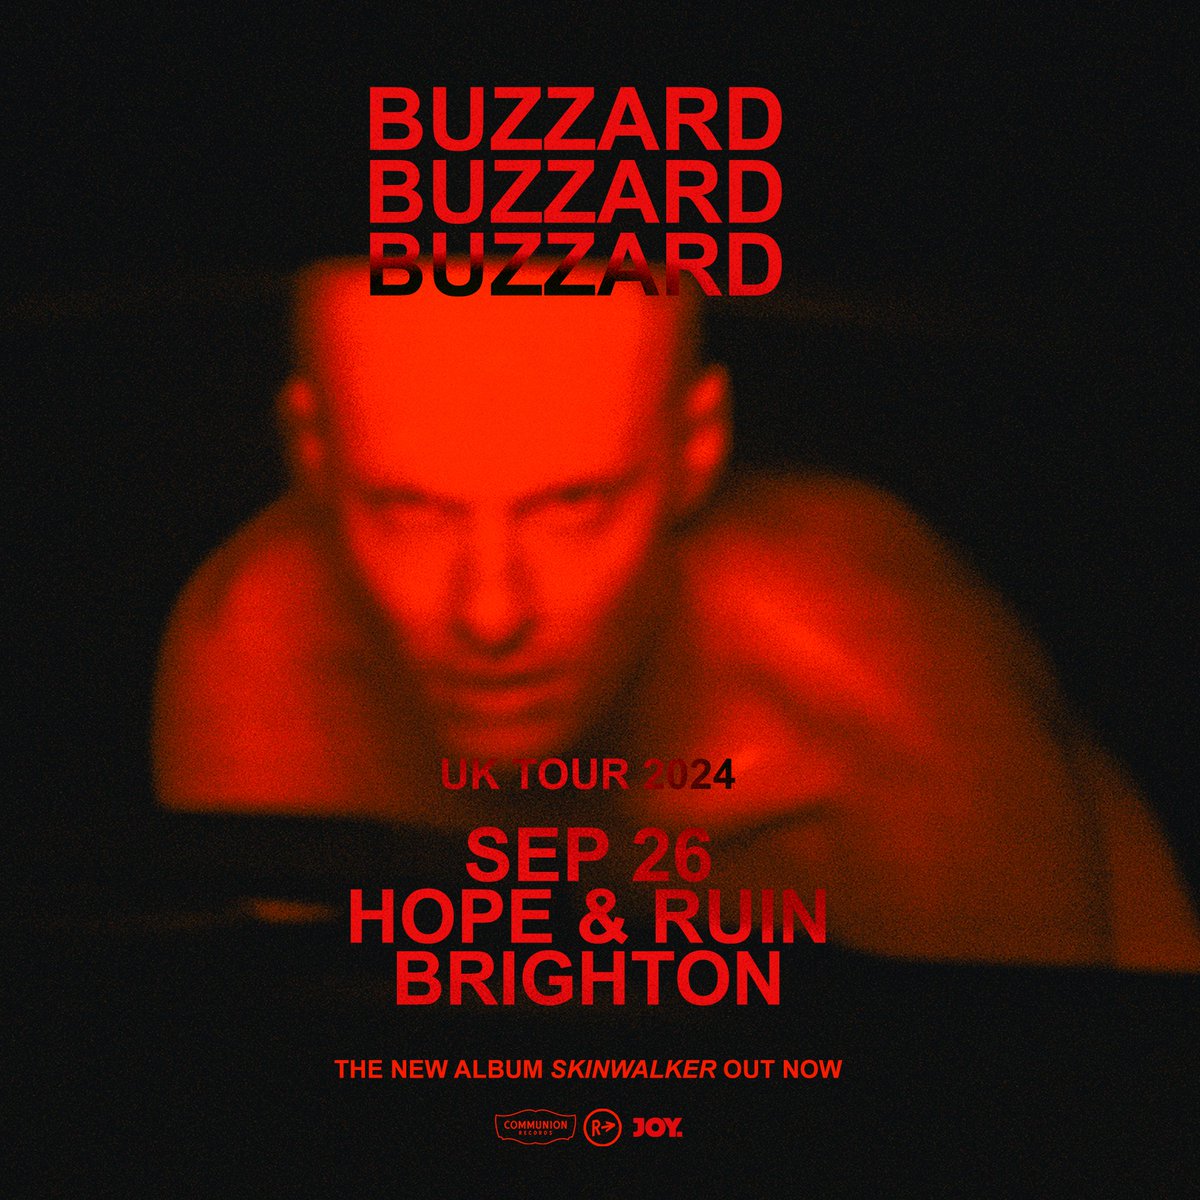 ON SALE NOW 📣 Tickets for @buzzardbuzzard at The Hope & Ruin are on sale now! 🎟 bit.ly/3Jv1P4a